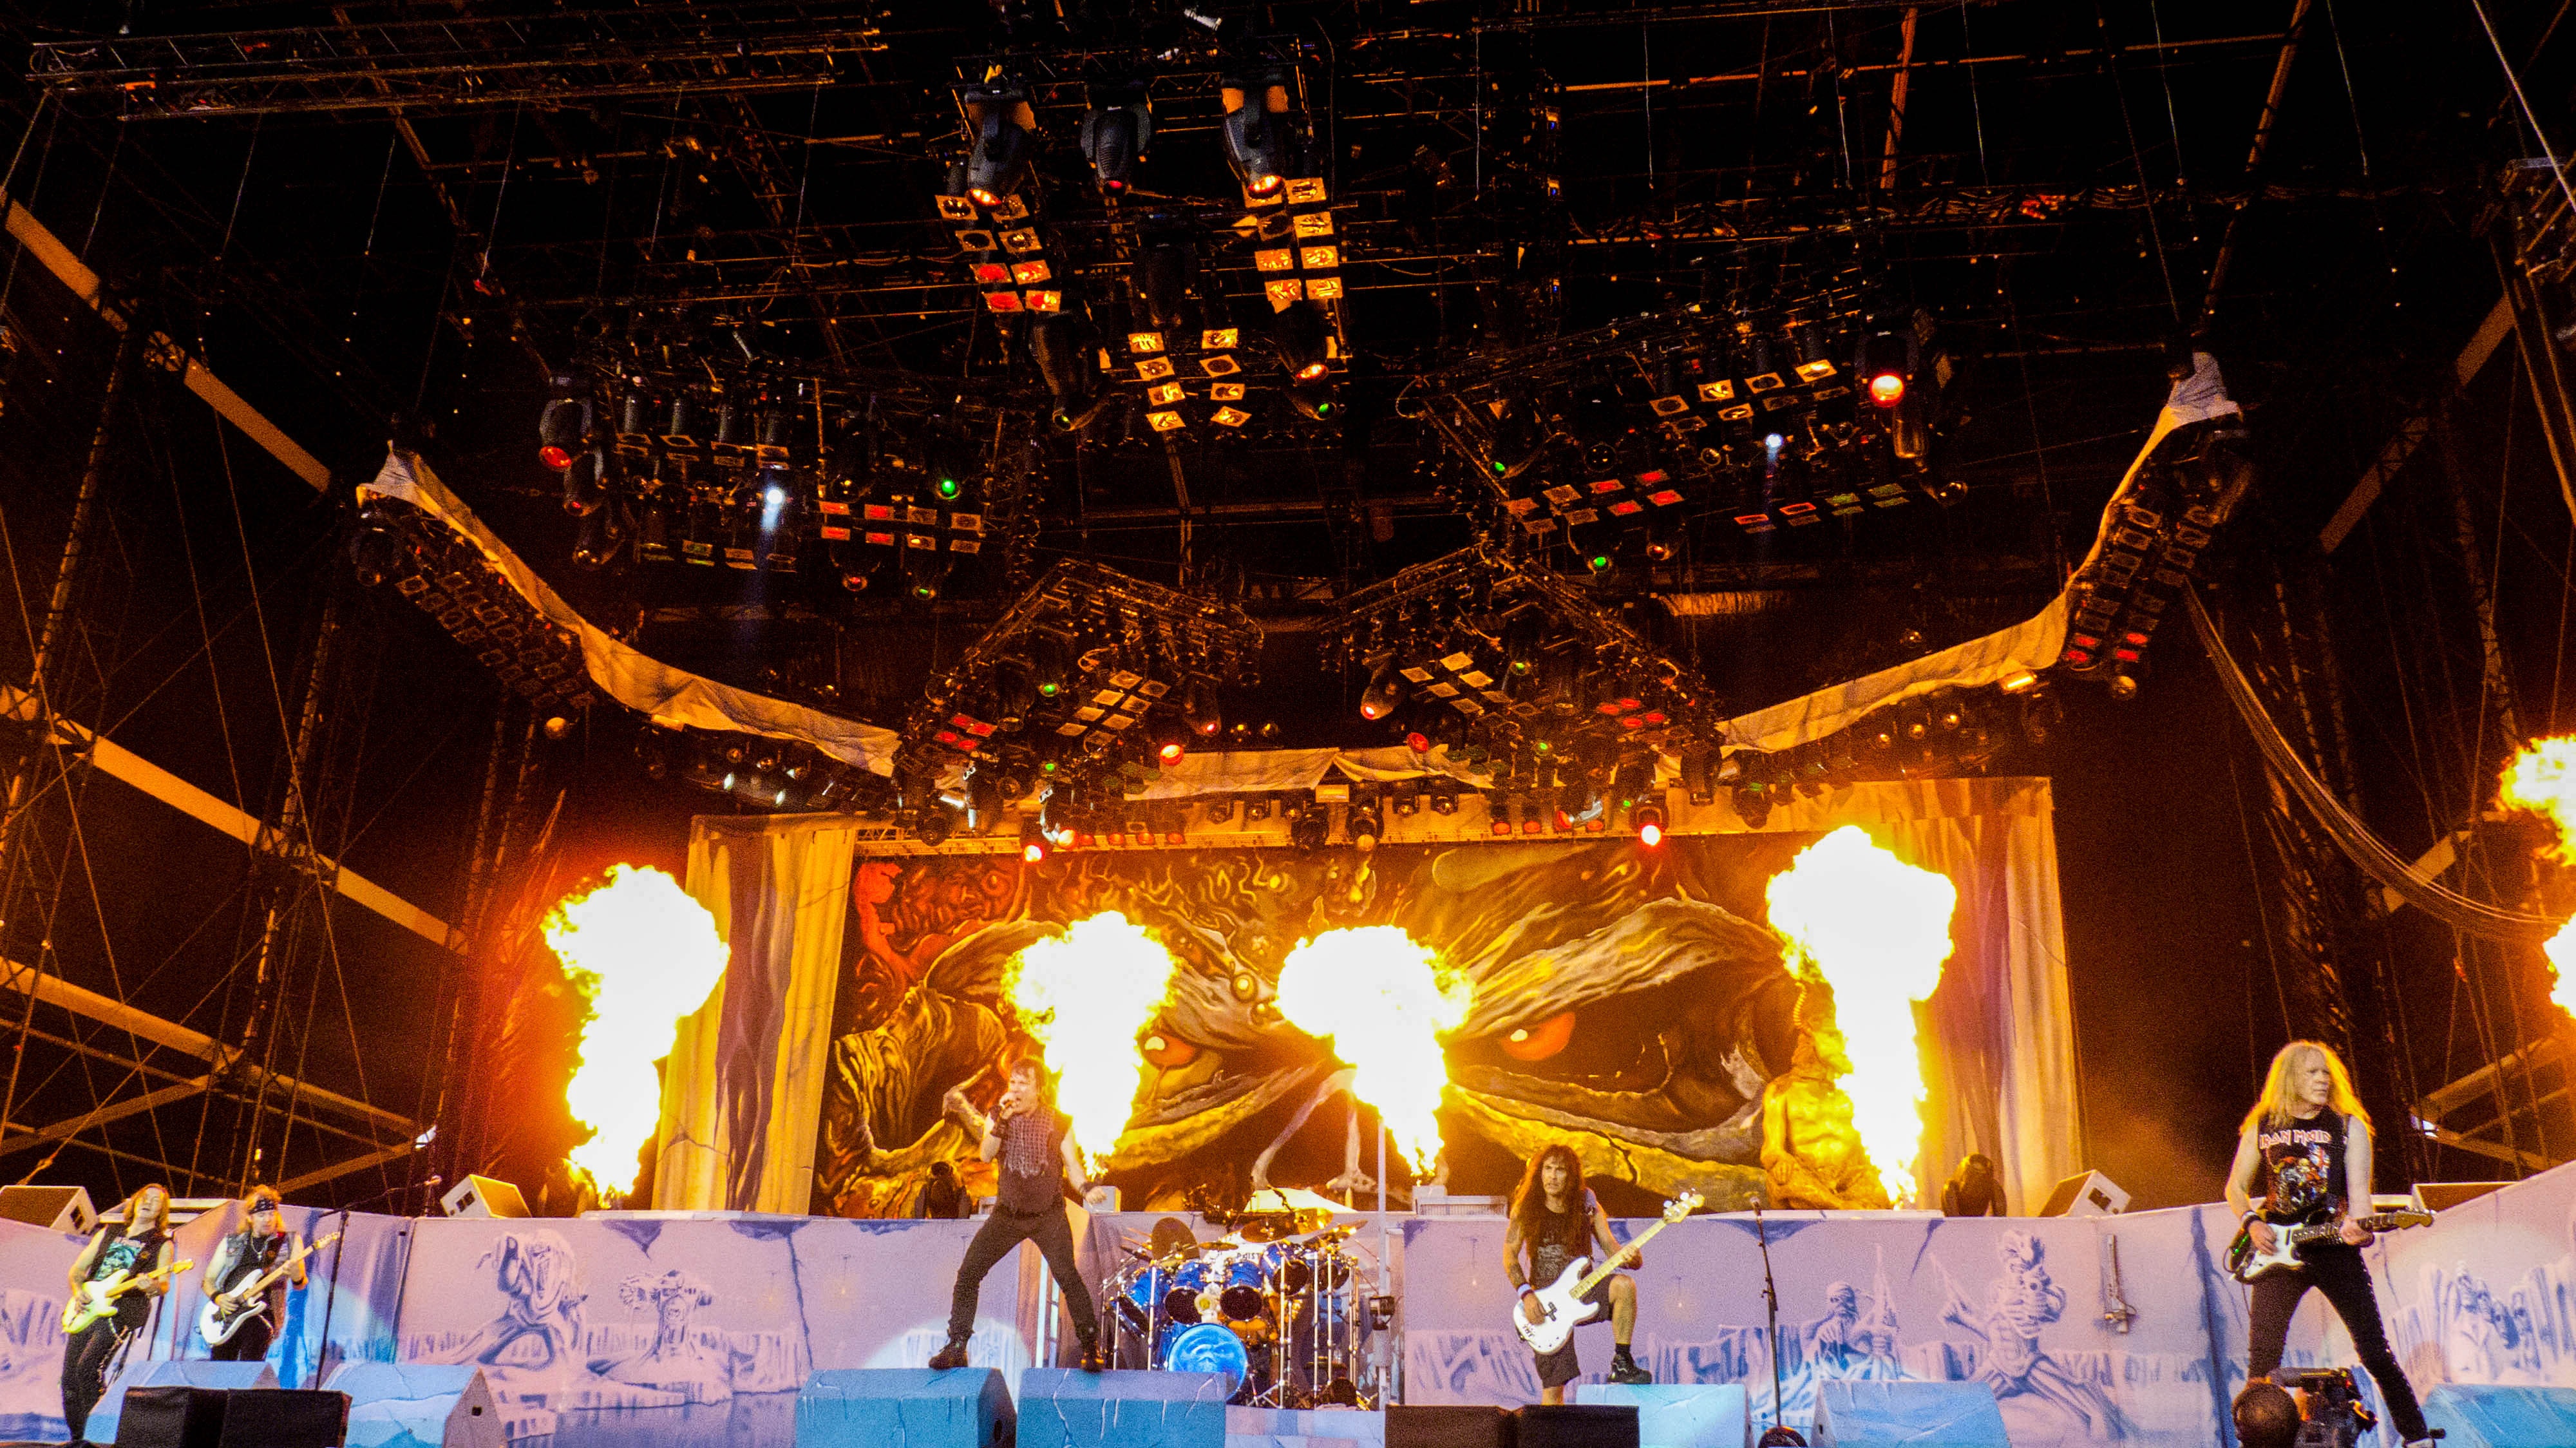 Band Playing on Stage With Fire, Band, Musician, Stage, Singer, HQ Photo